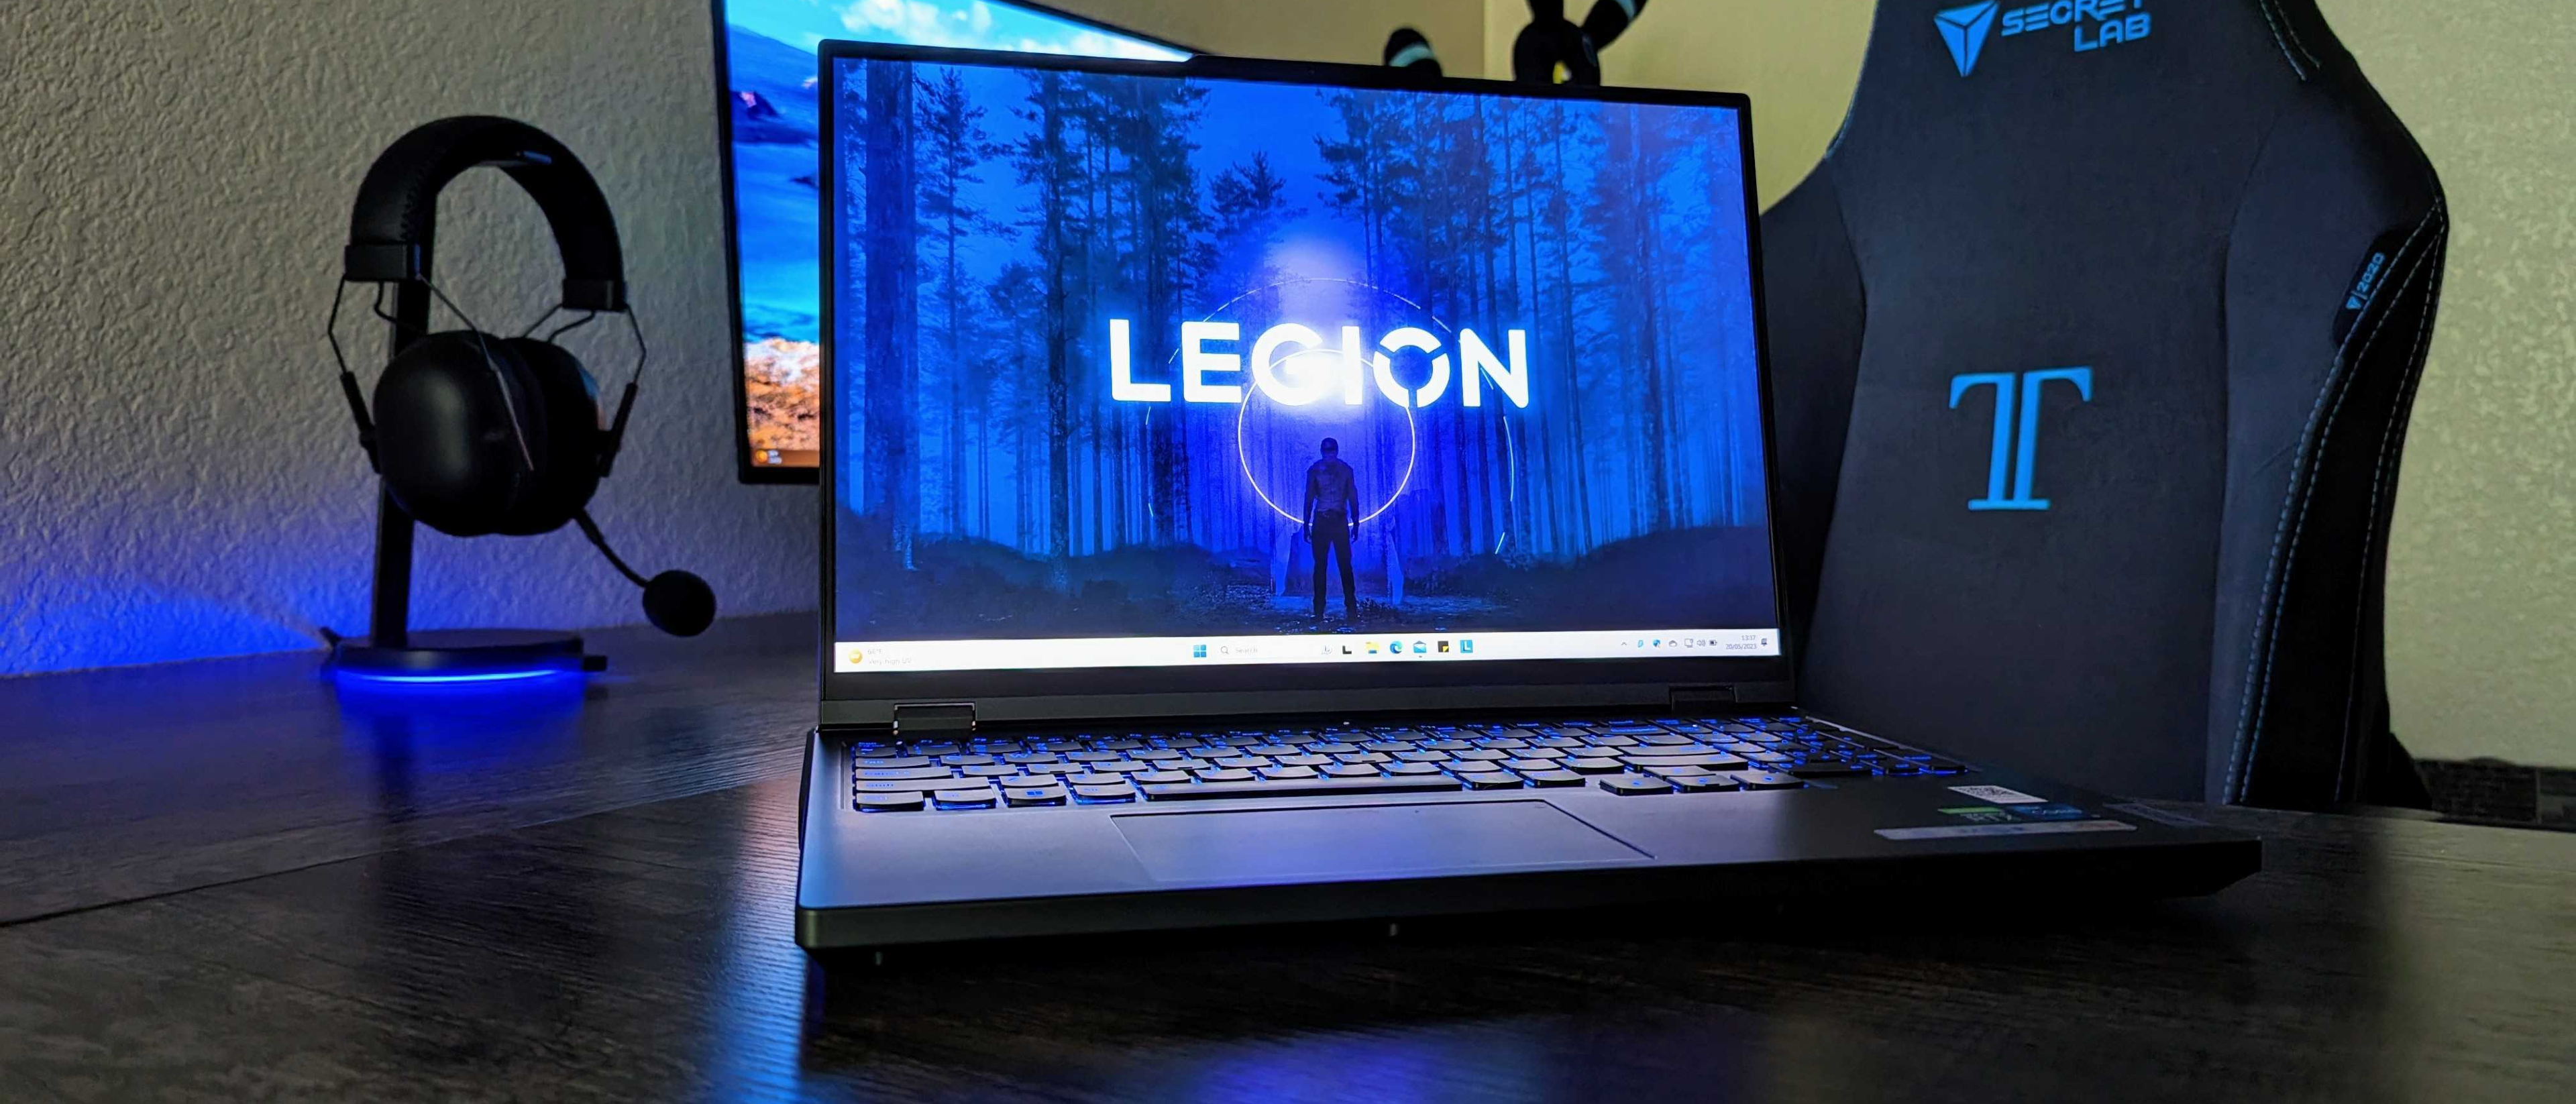 Lenovo's IdeaPad Gaming 3 laptop is now massively reduced